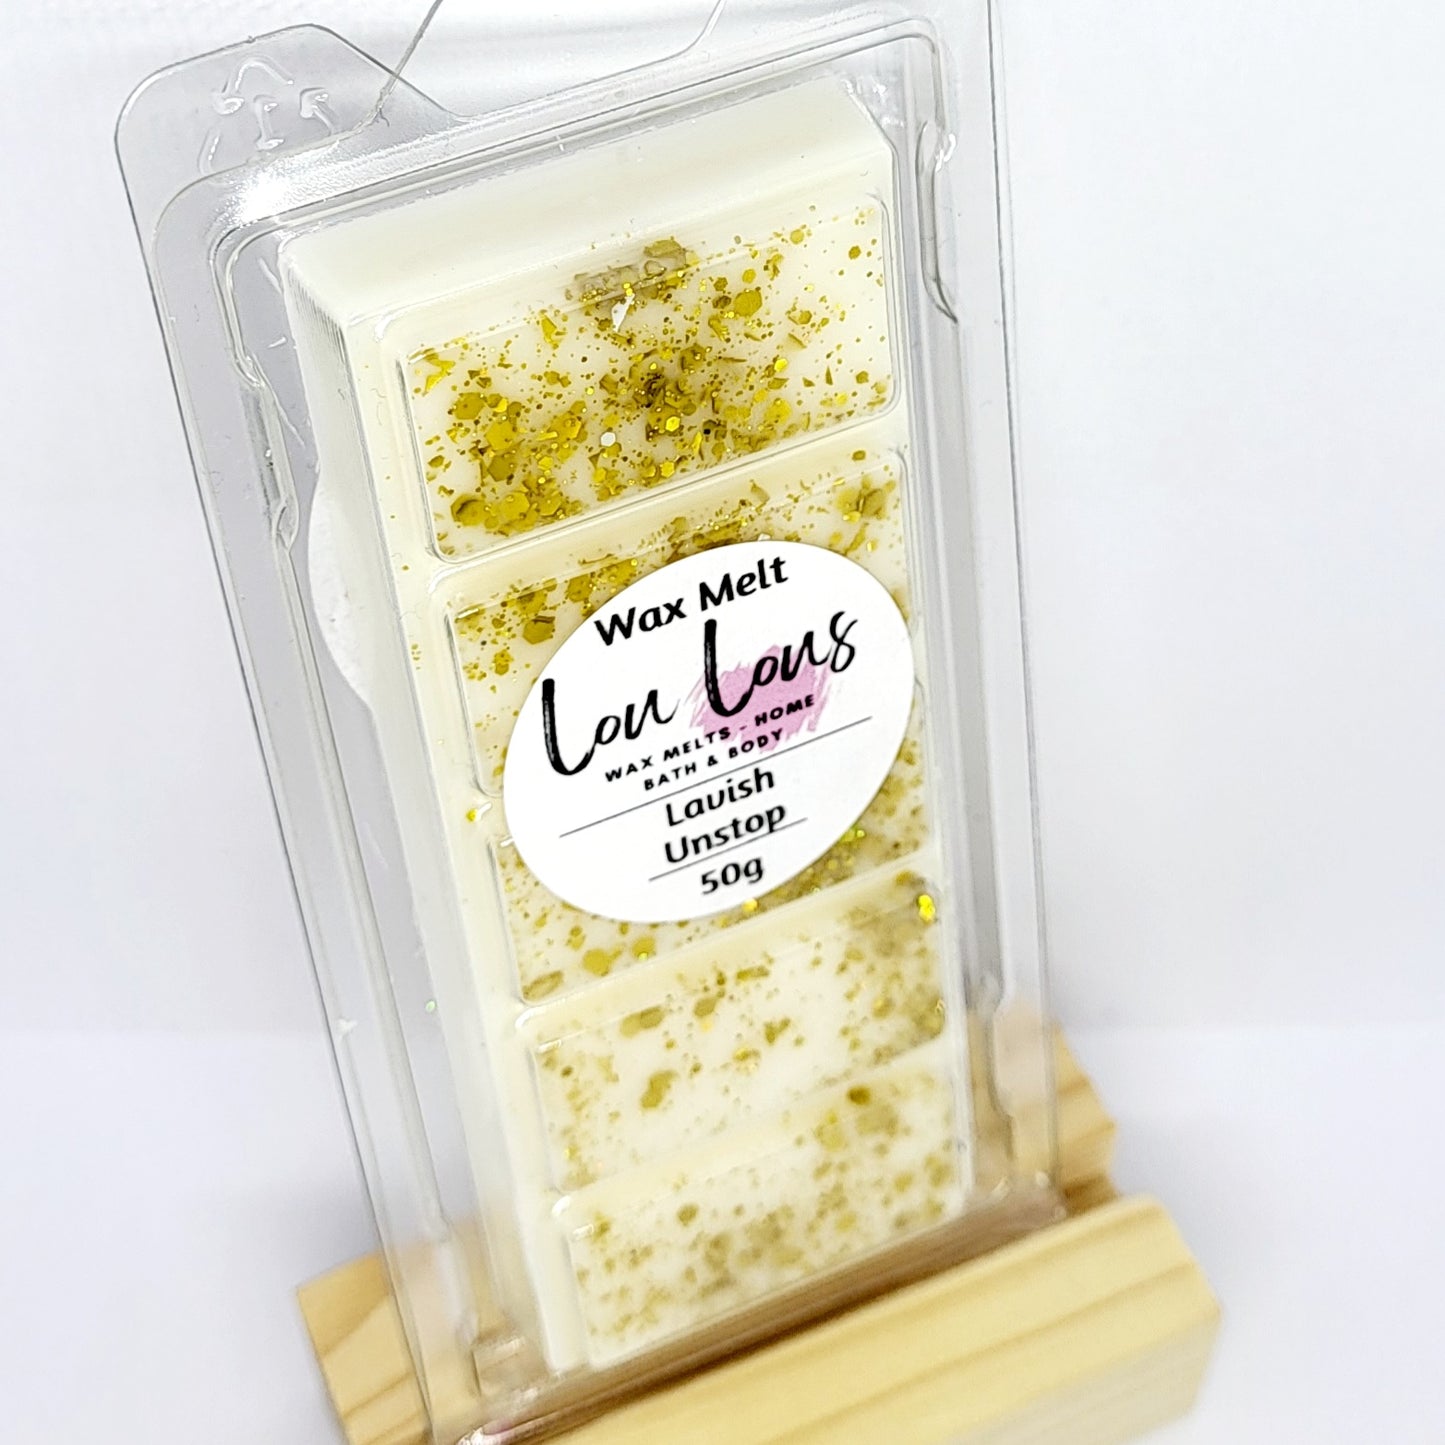 Wax melt snap bar scented in lavish unstoppables